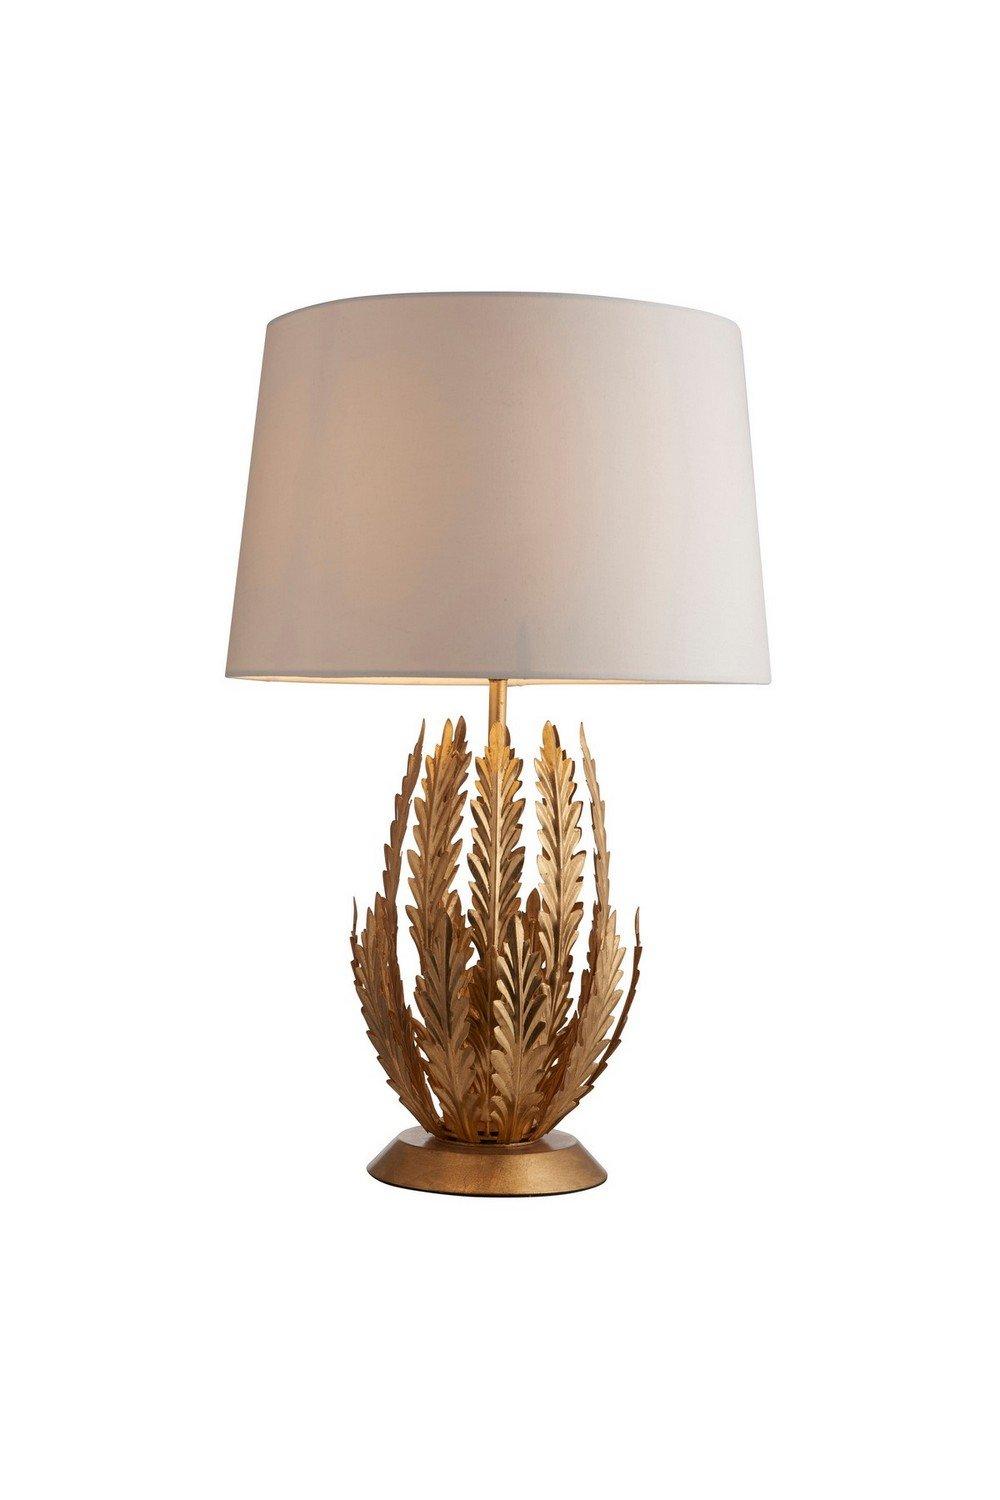 Delphine Decorative Gold Layered Leaf Table Lamp with Ivory Fabric Shades